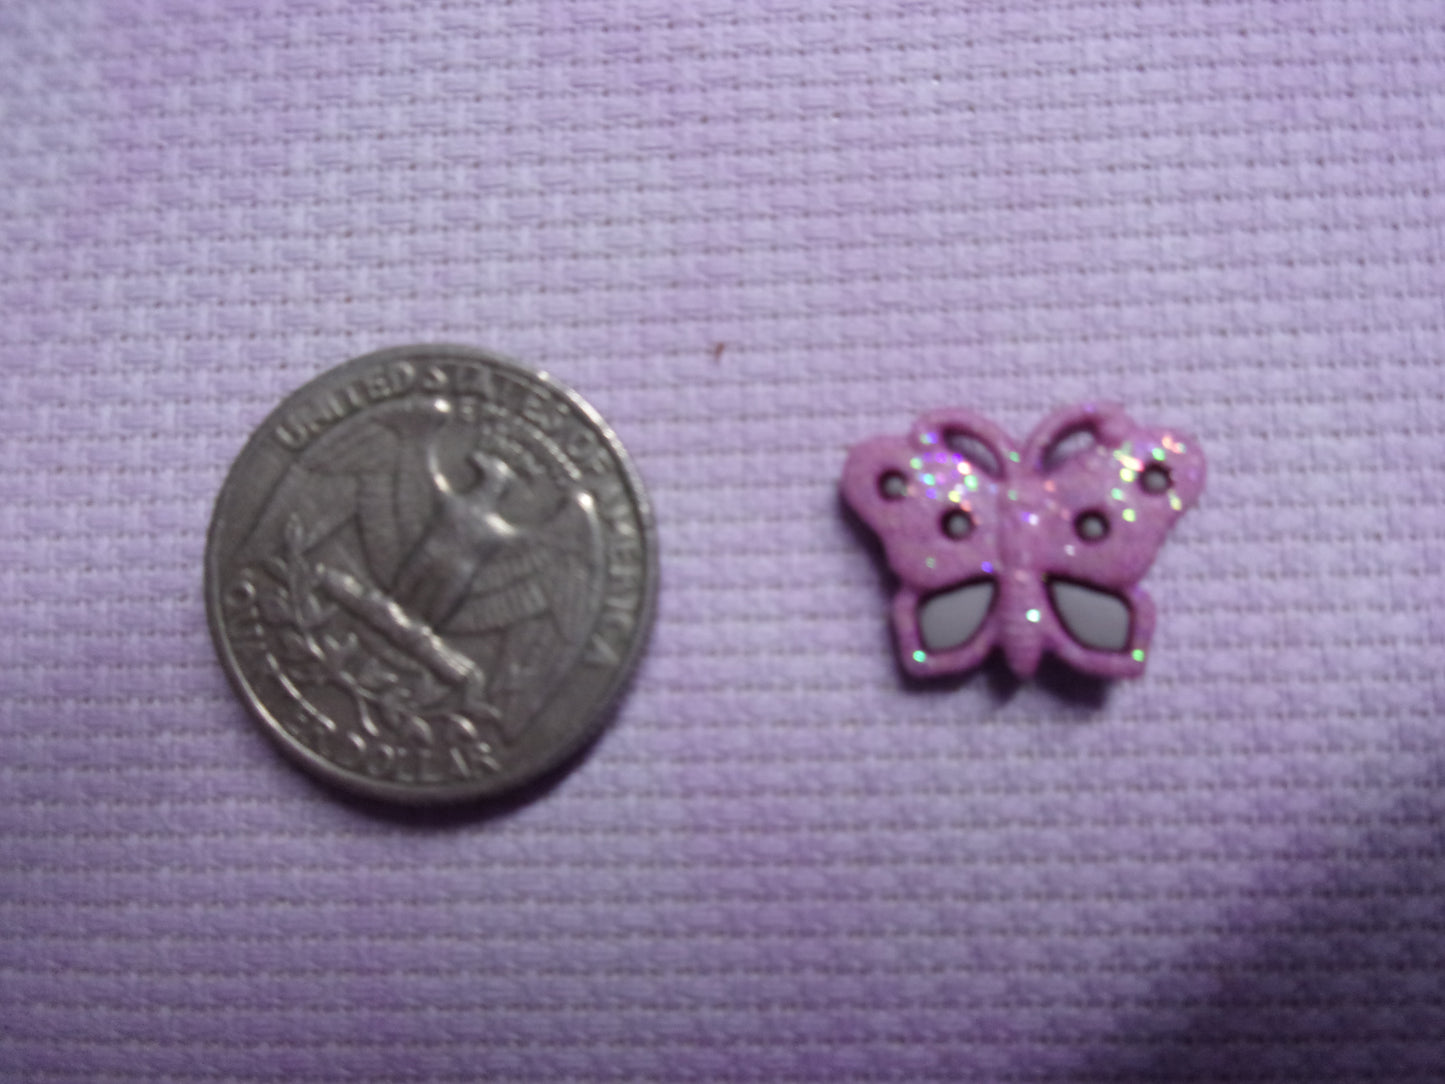 Butterfly needle minders